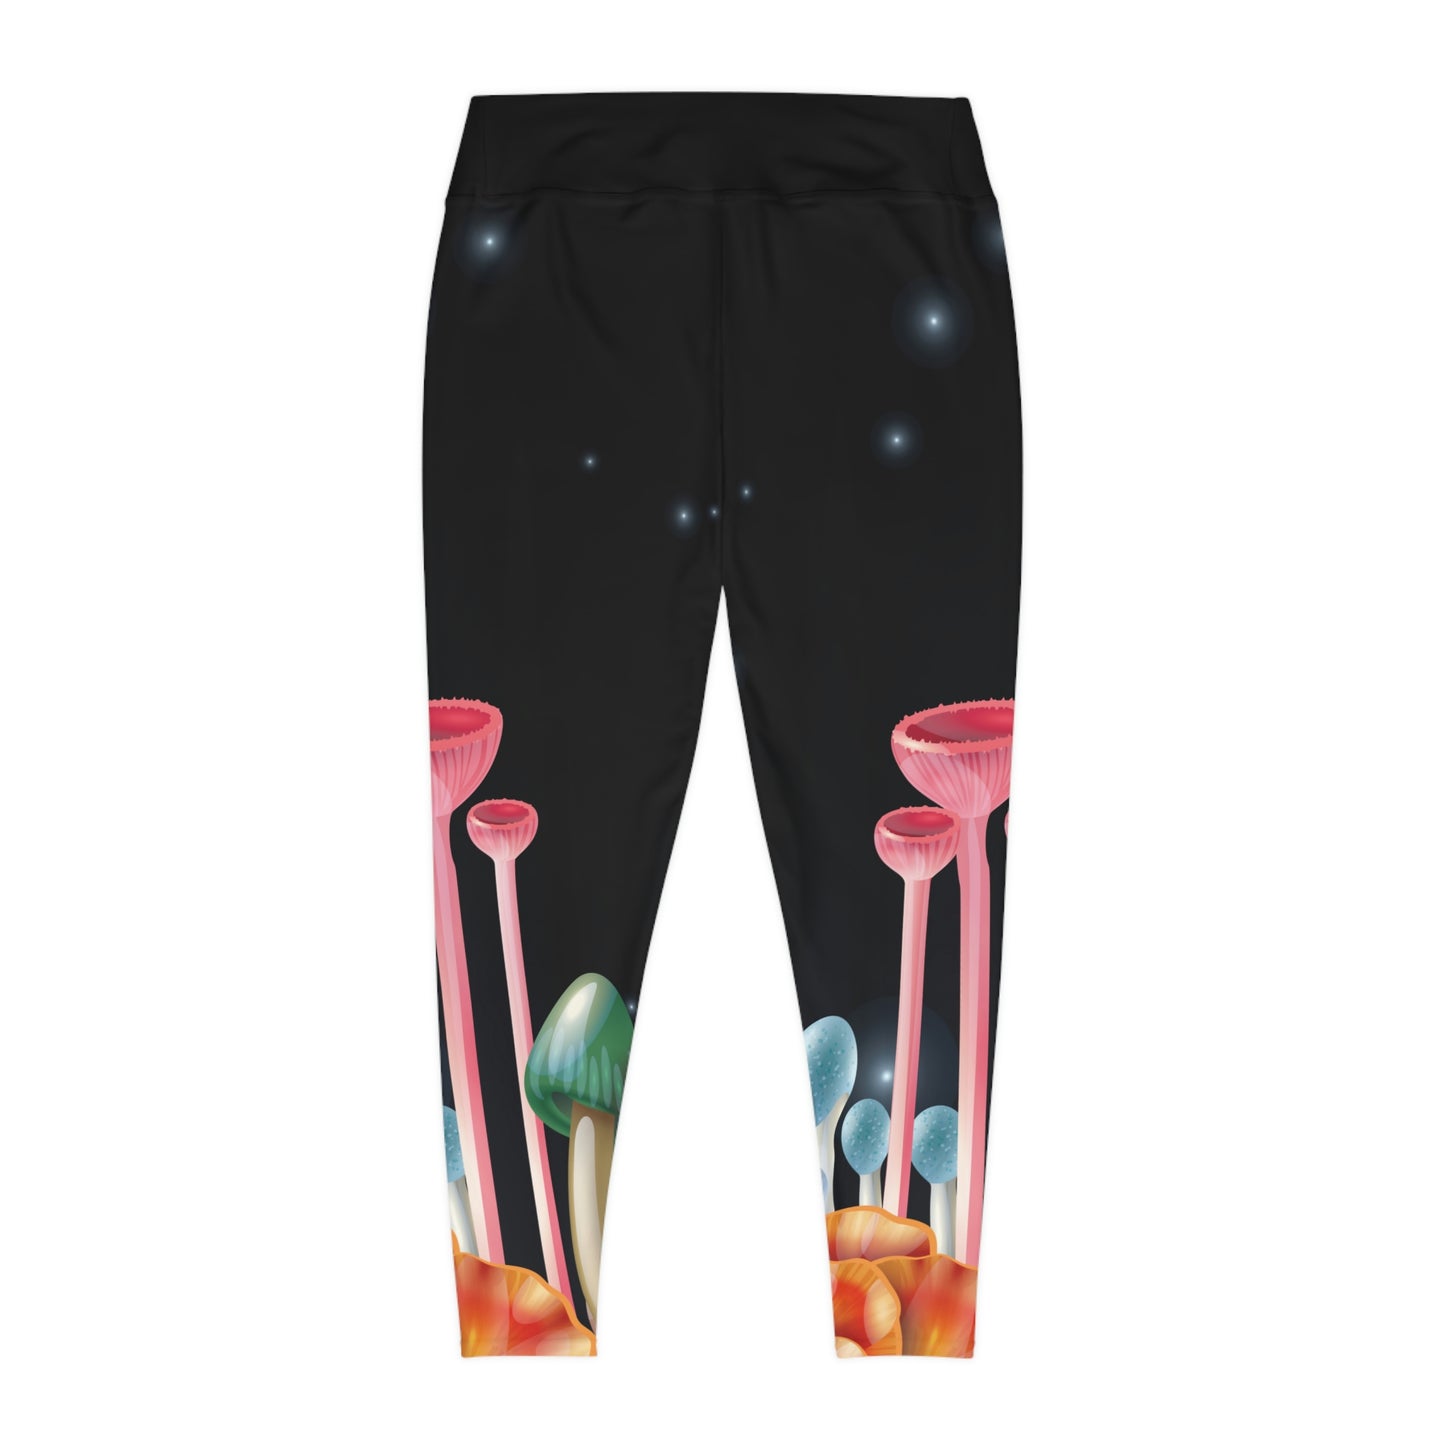 Magic Mushrooms cottagecore, Psychedelic Plus Size Leggings, One of a Kind - Unique Workout Activewear tights ,Mothers Day, Wife Christmas Gift